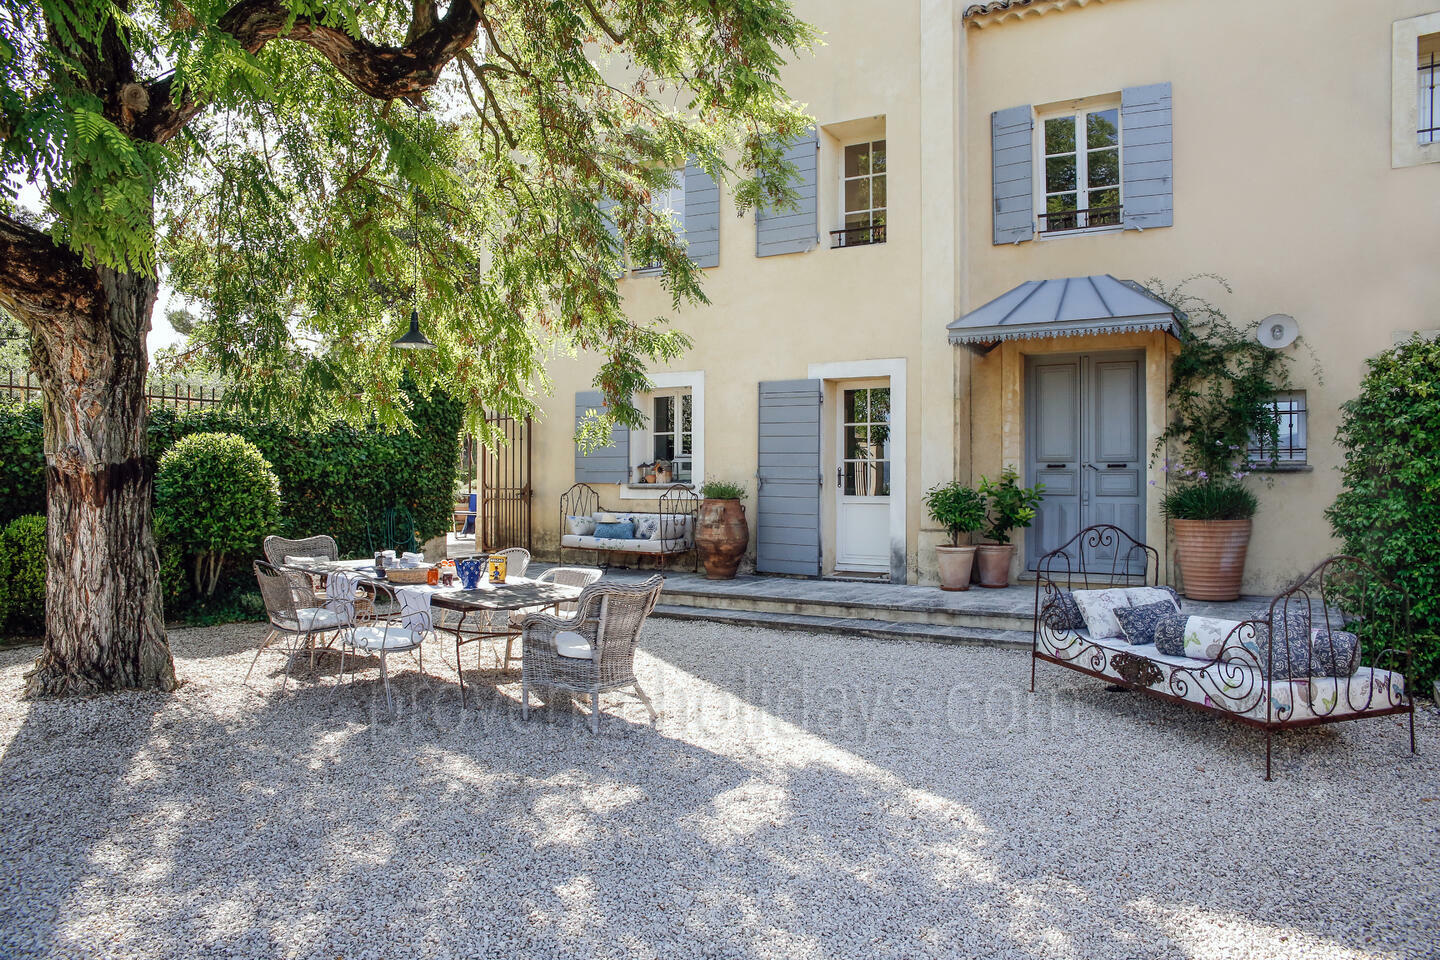 Authentic Provencal Holiday Rental with Guest House 1 - Mas des Anges: Villa: Exterior